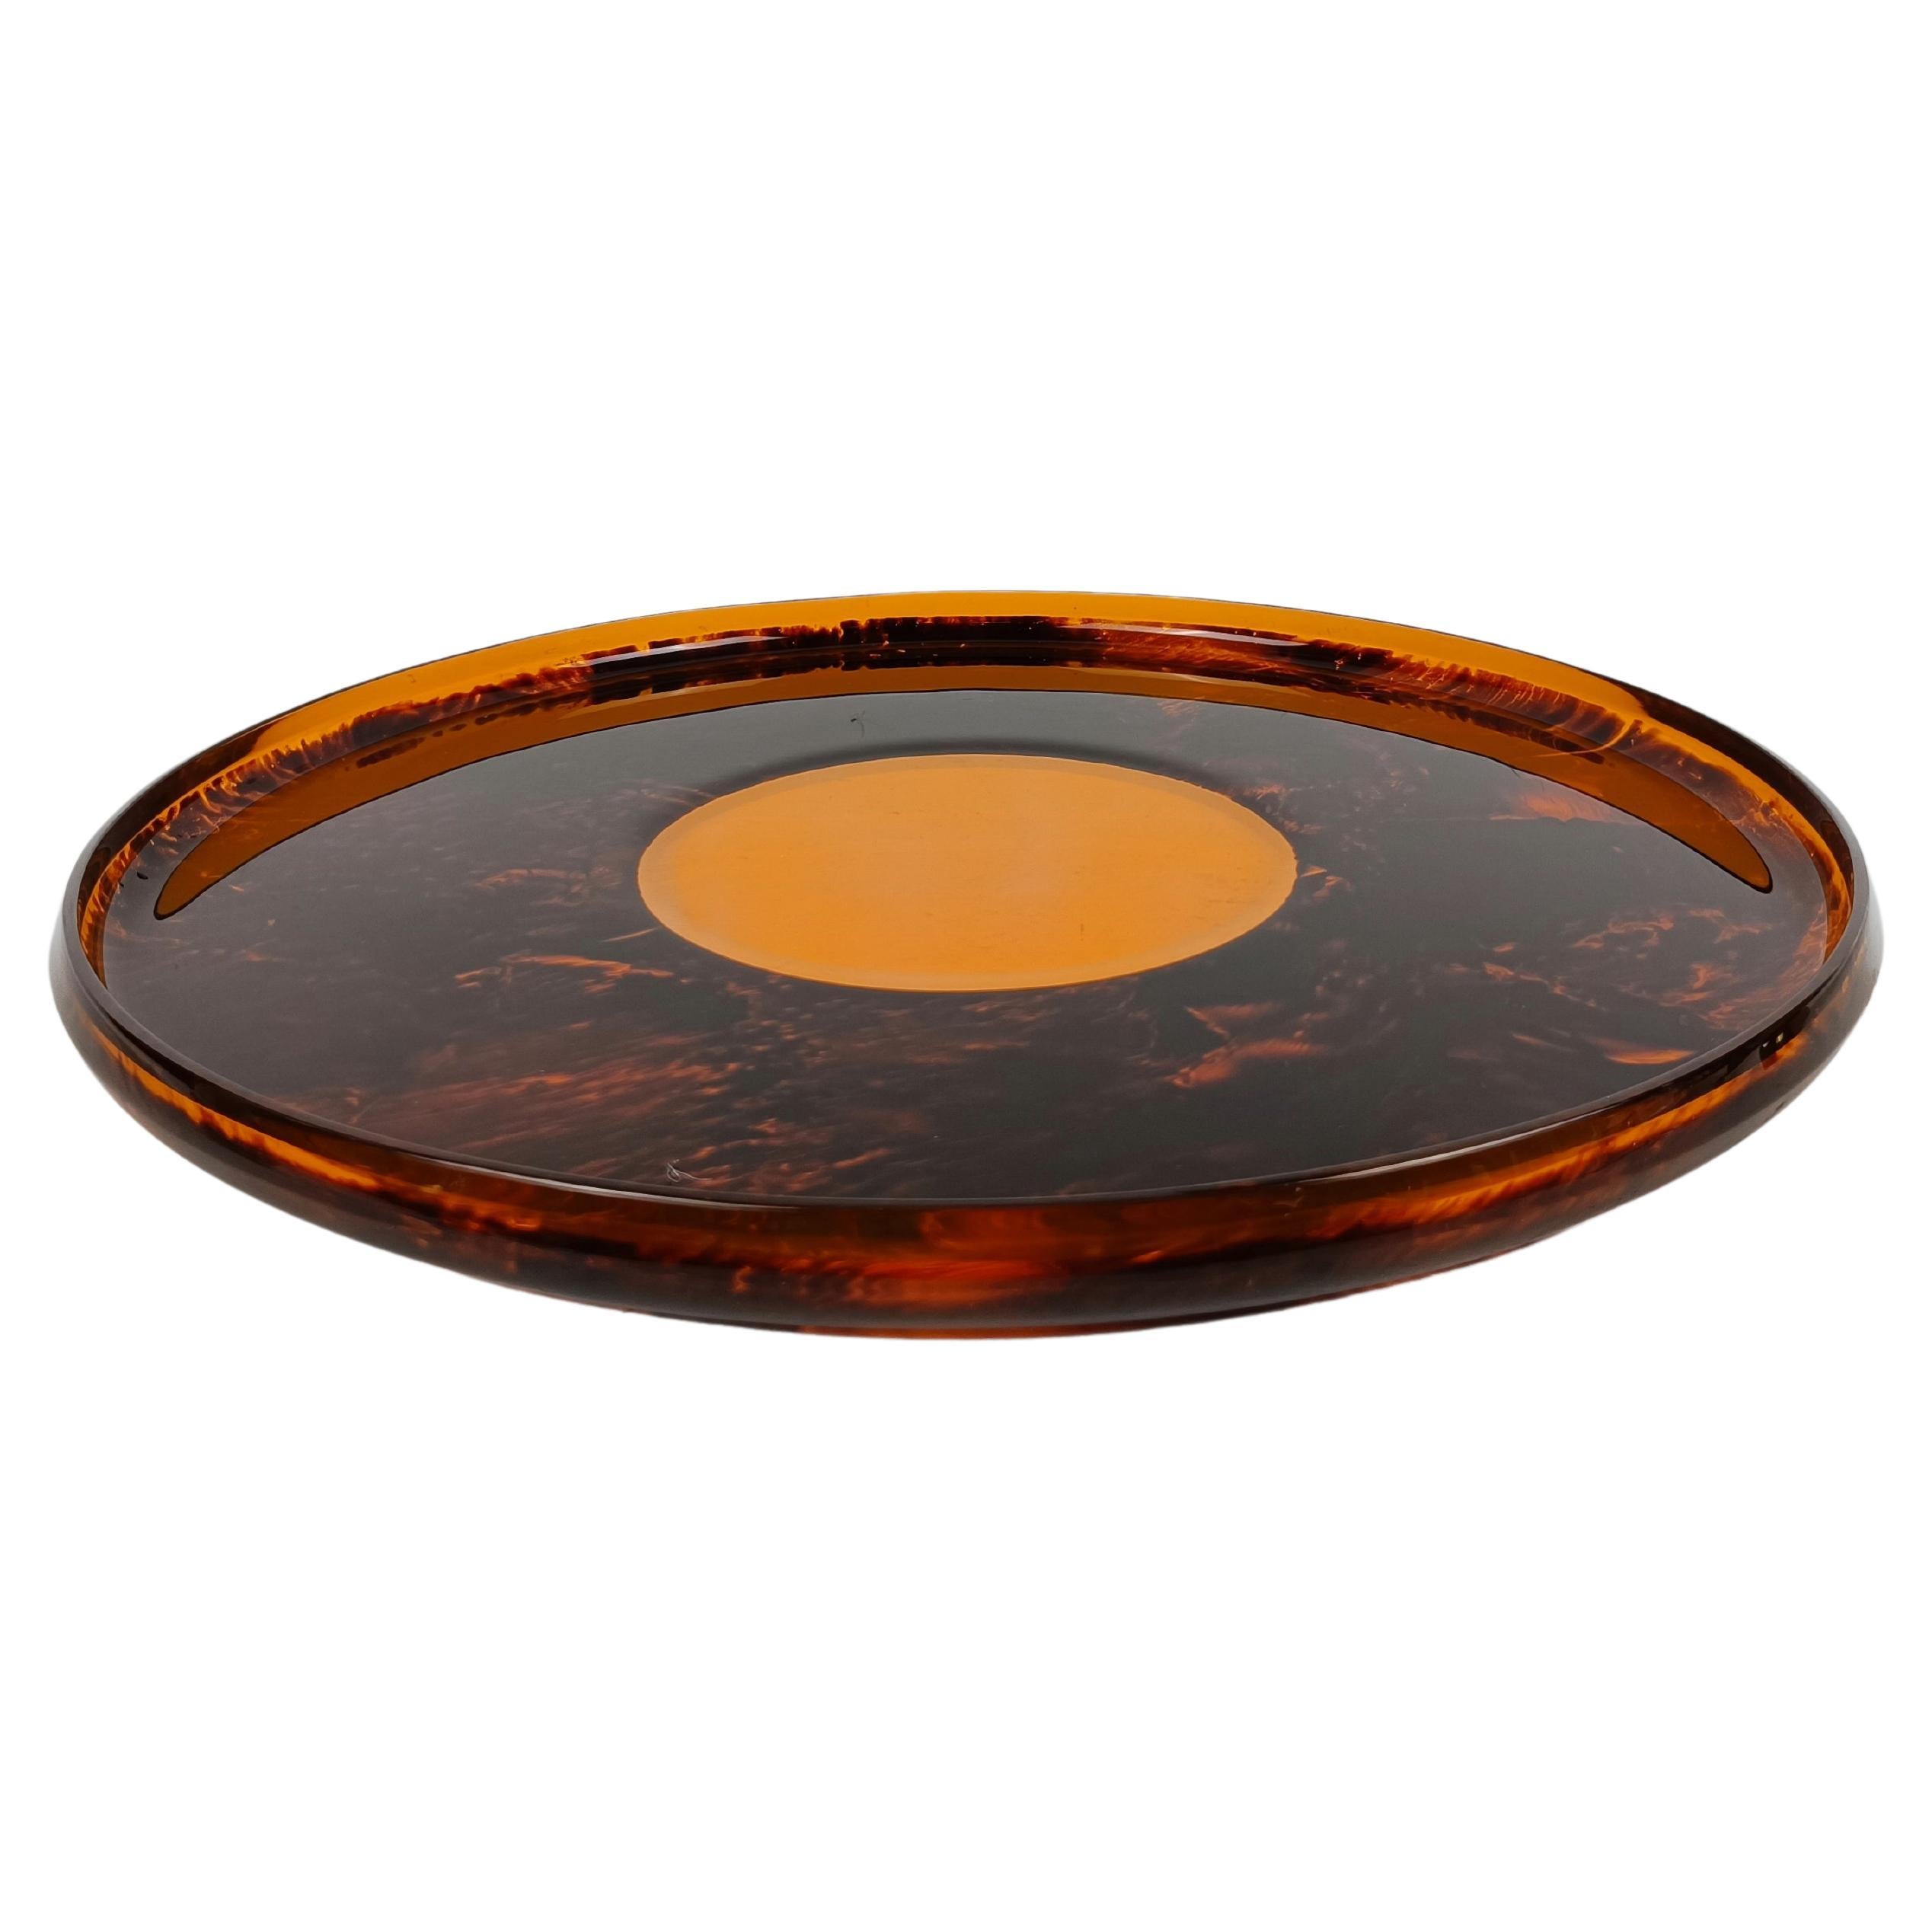 Italian 1970s Serving Round Tray in Indian Yellow Lucite and Faux Tortoiseshell 